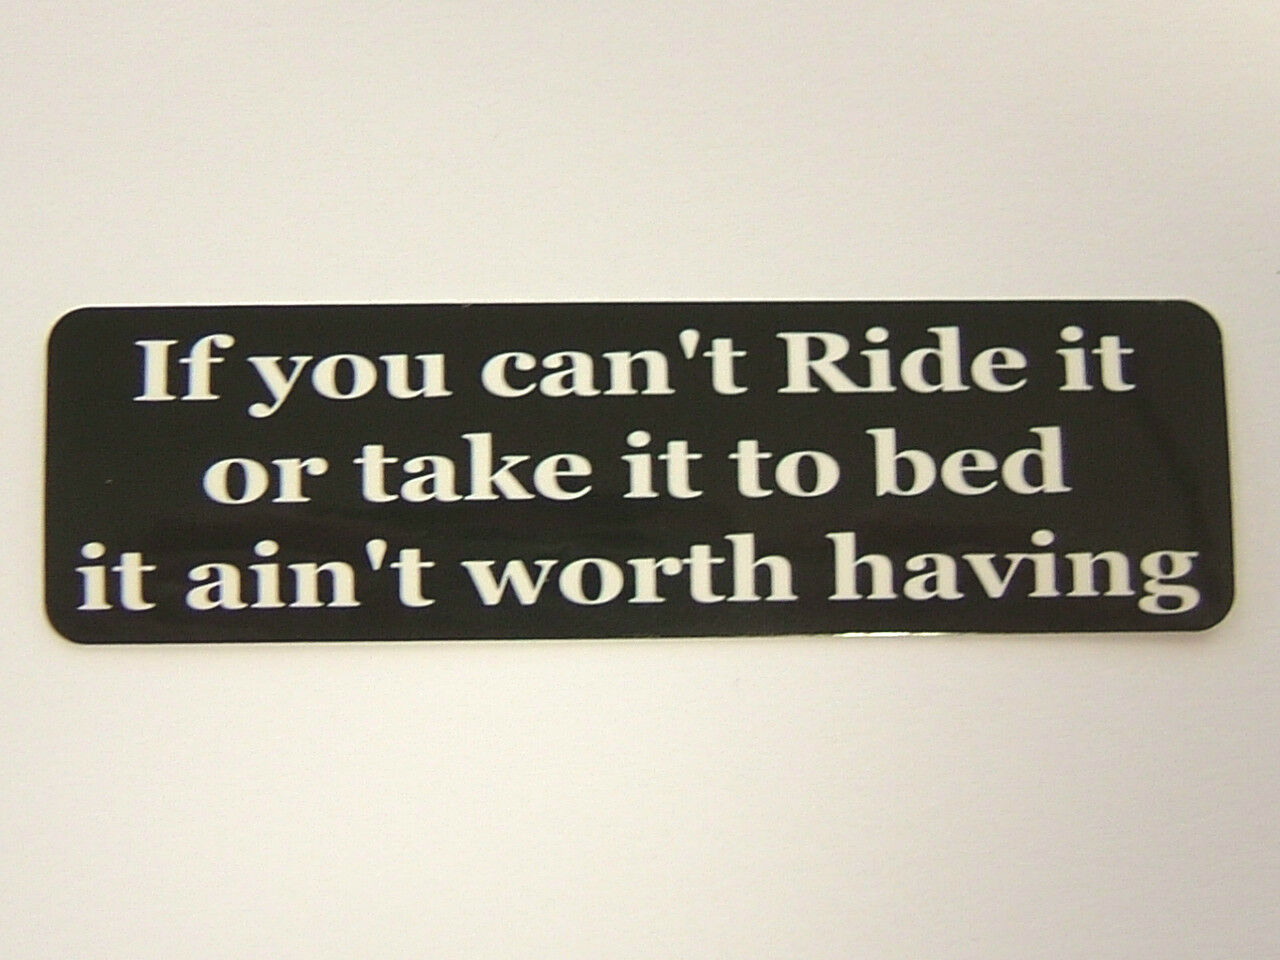 Helmet Sticker "if You Can't Ride It Or Take It To Bed..." Single Sticker  #f971